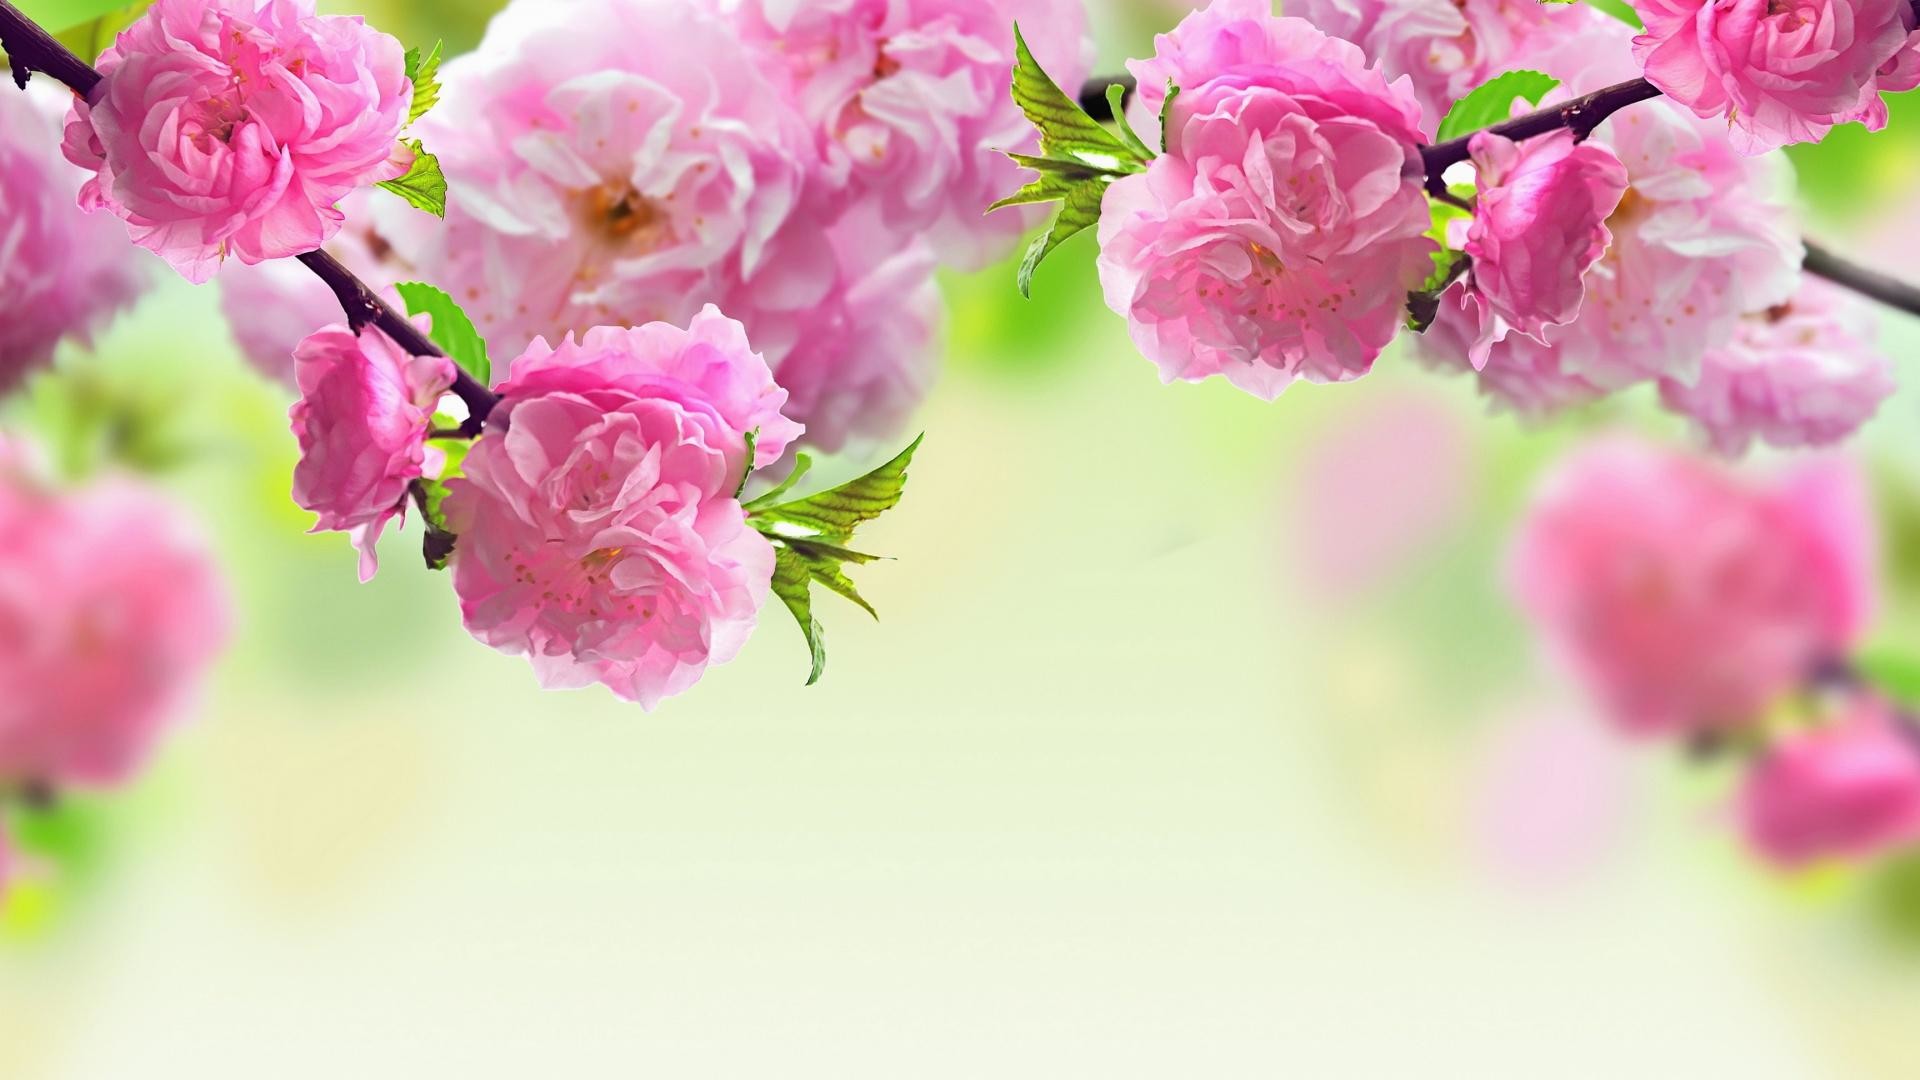 1920x1080 7. funeral-flowers-pictures7-600x338